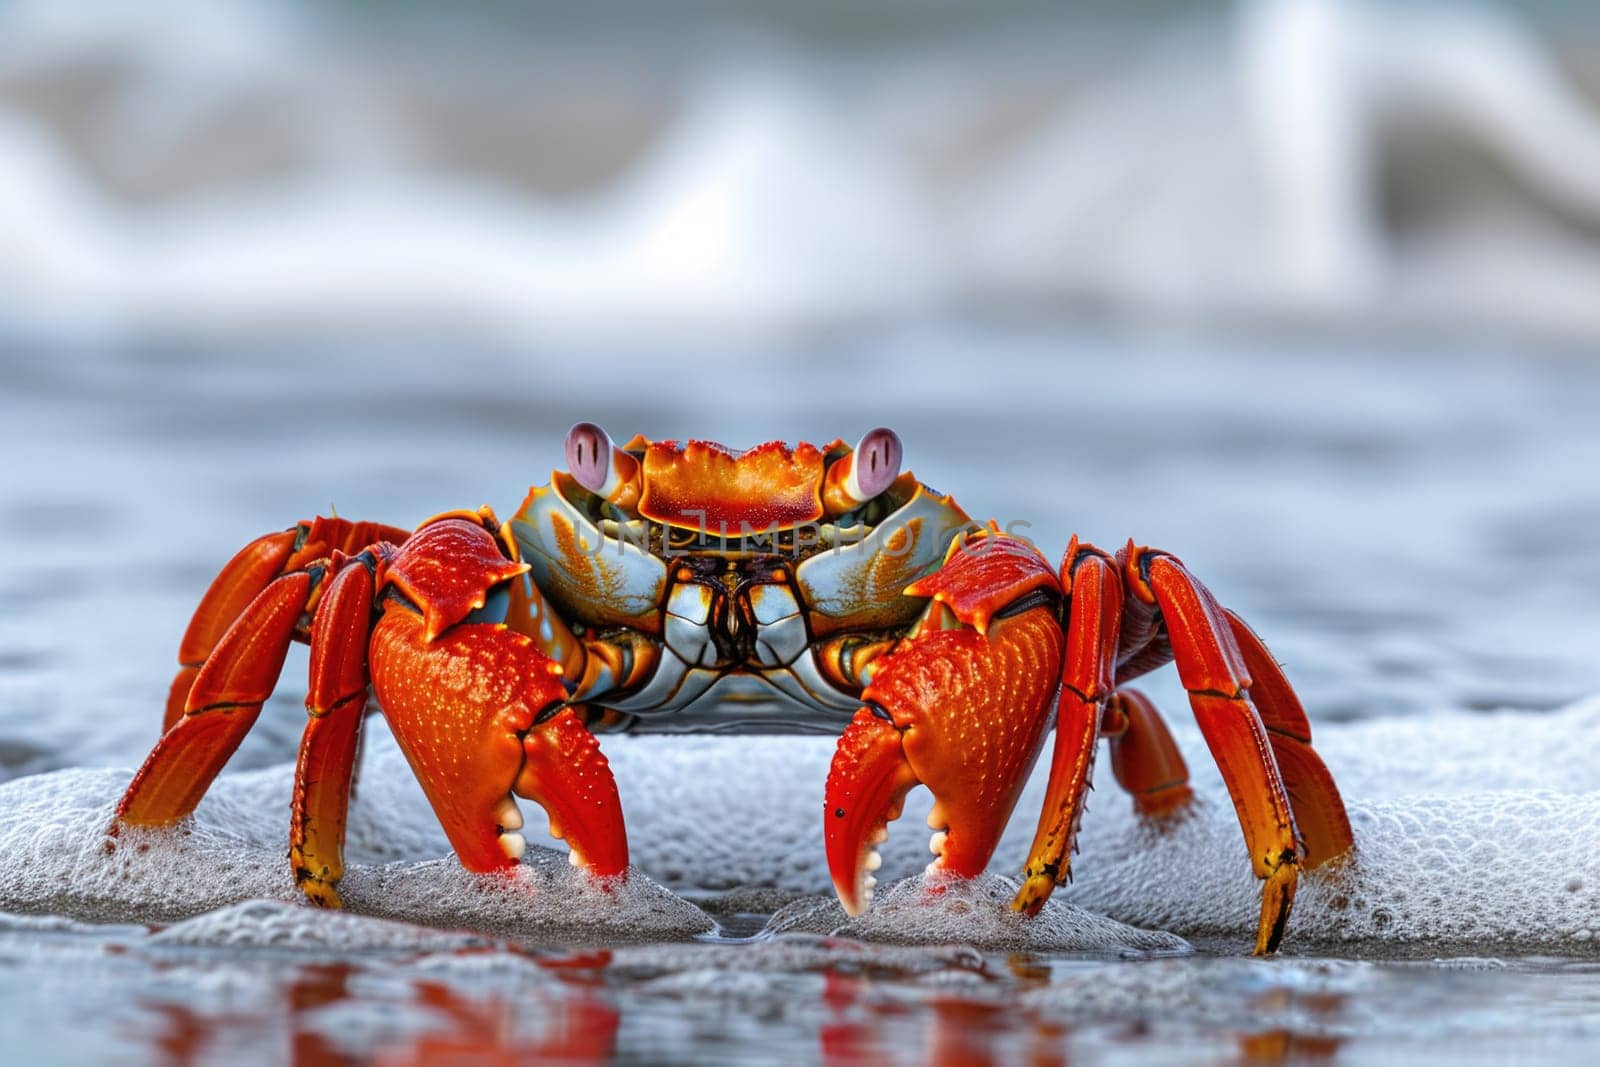 Close-up of a large crab in its natural habitat.